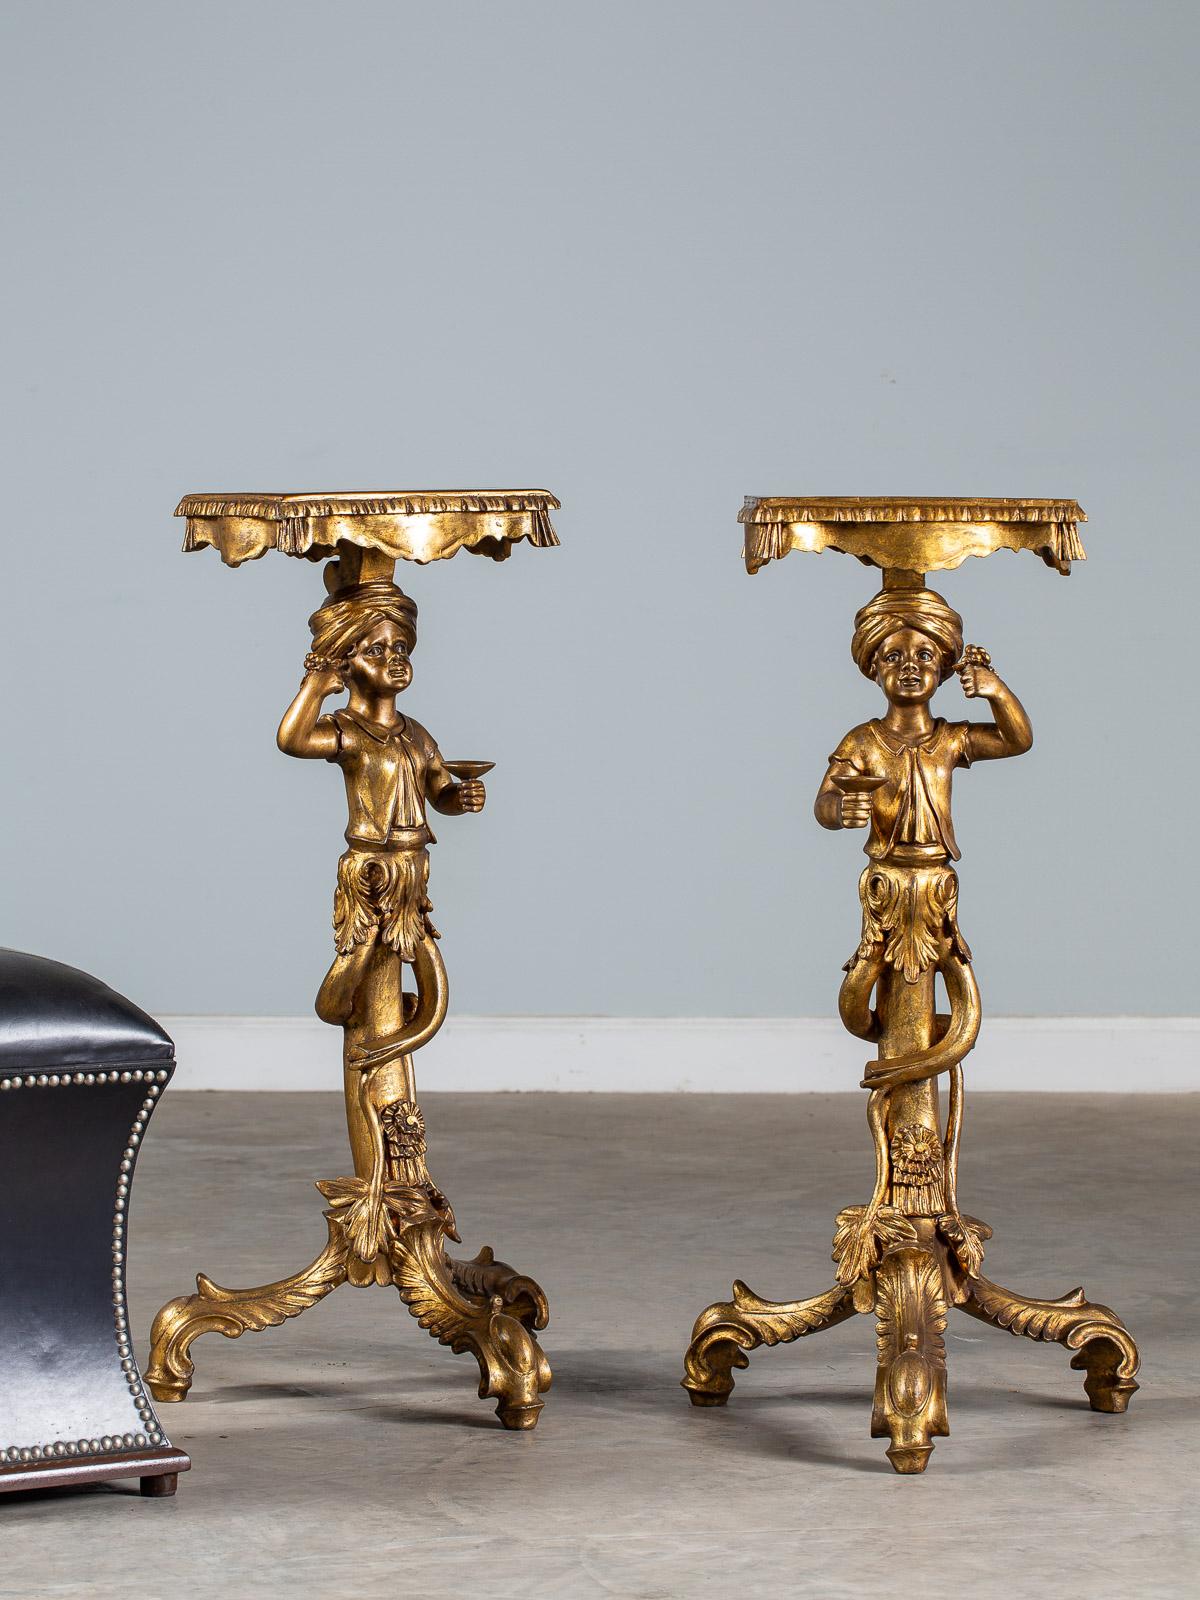 A pair of vintage Italian Venetian gilded Blackamoor pedestal column figures circa 1950 each holding aloft a cluster of grapes and a goblet. Please notice the figures are facing each other with the grapes and goblets in opposite hands. The top of